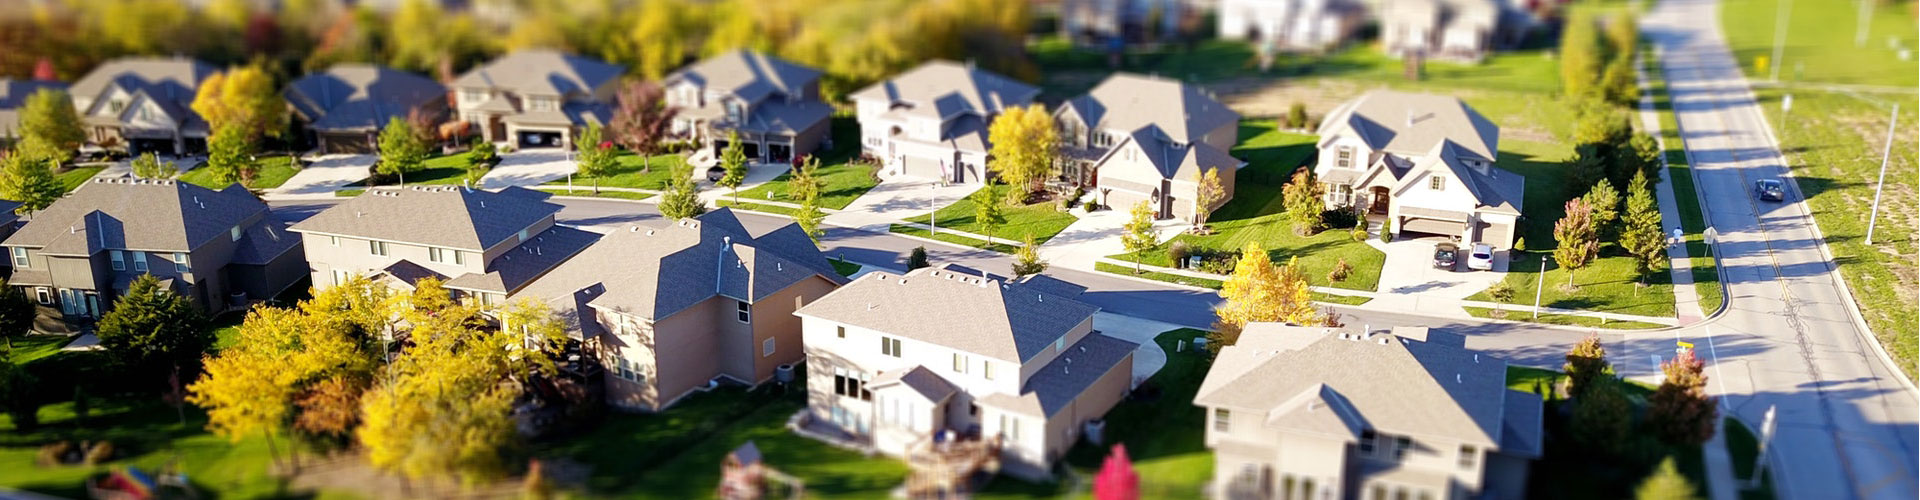 https://recovery-realty.com/increased-demand-and-hot-markets/